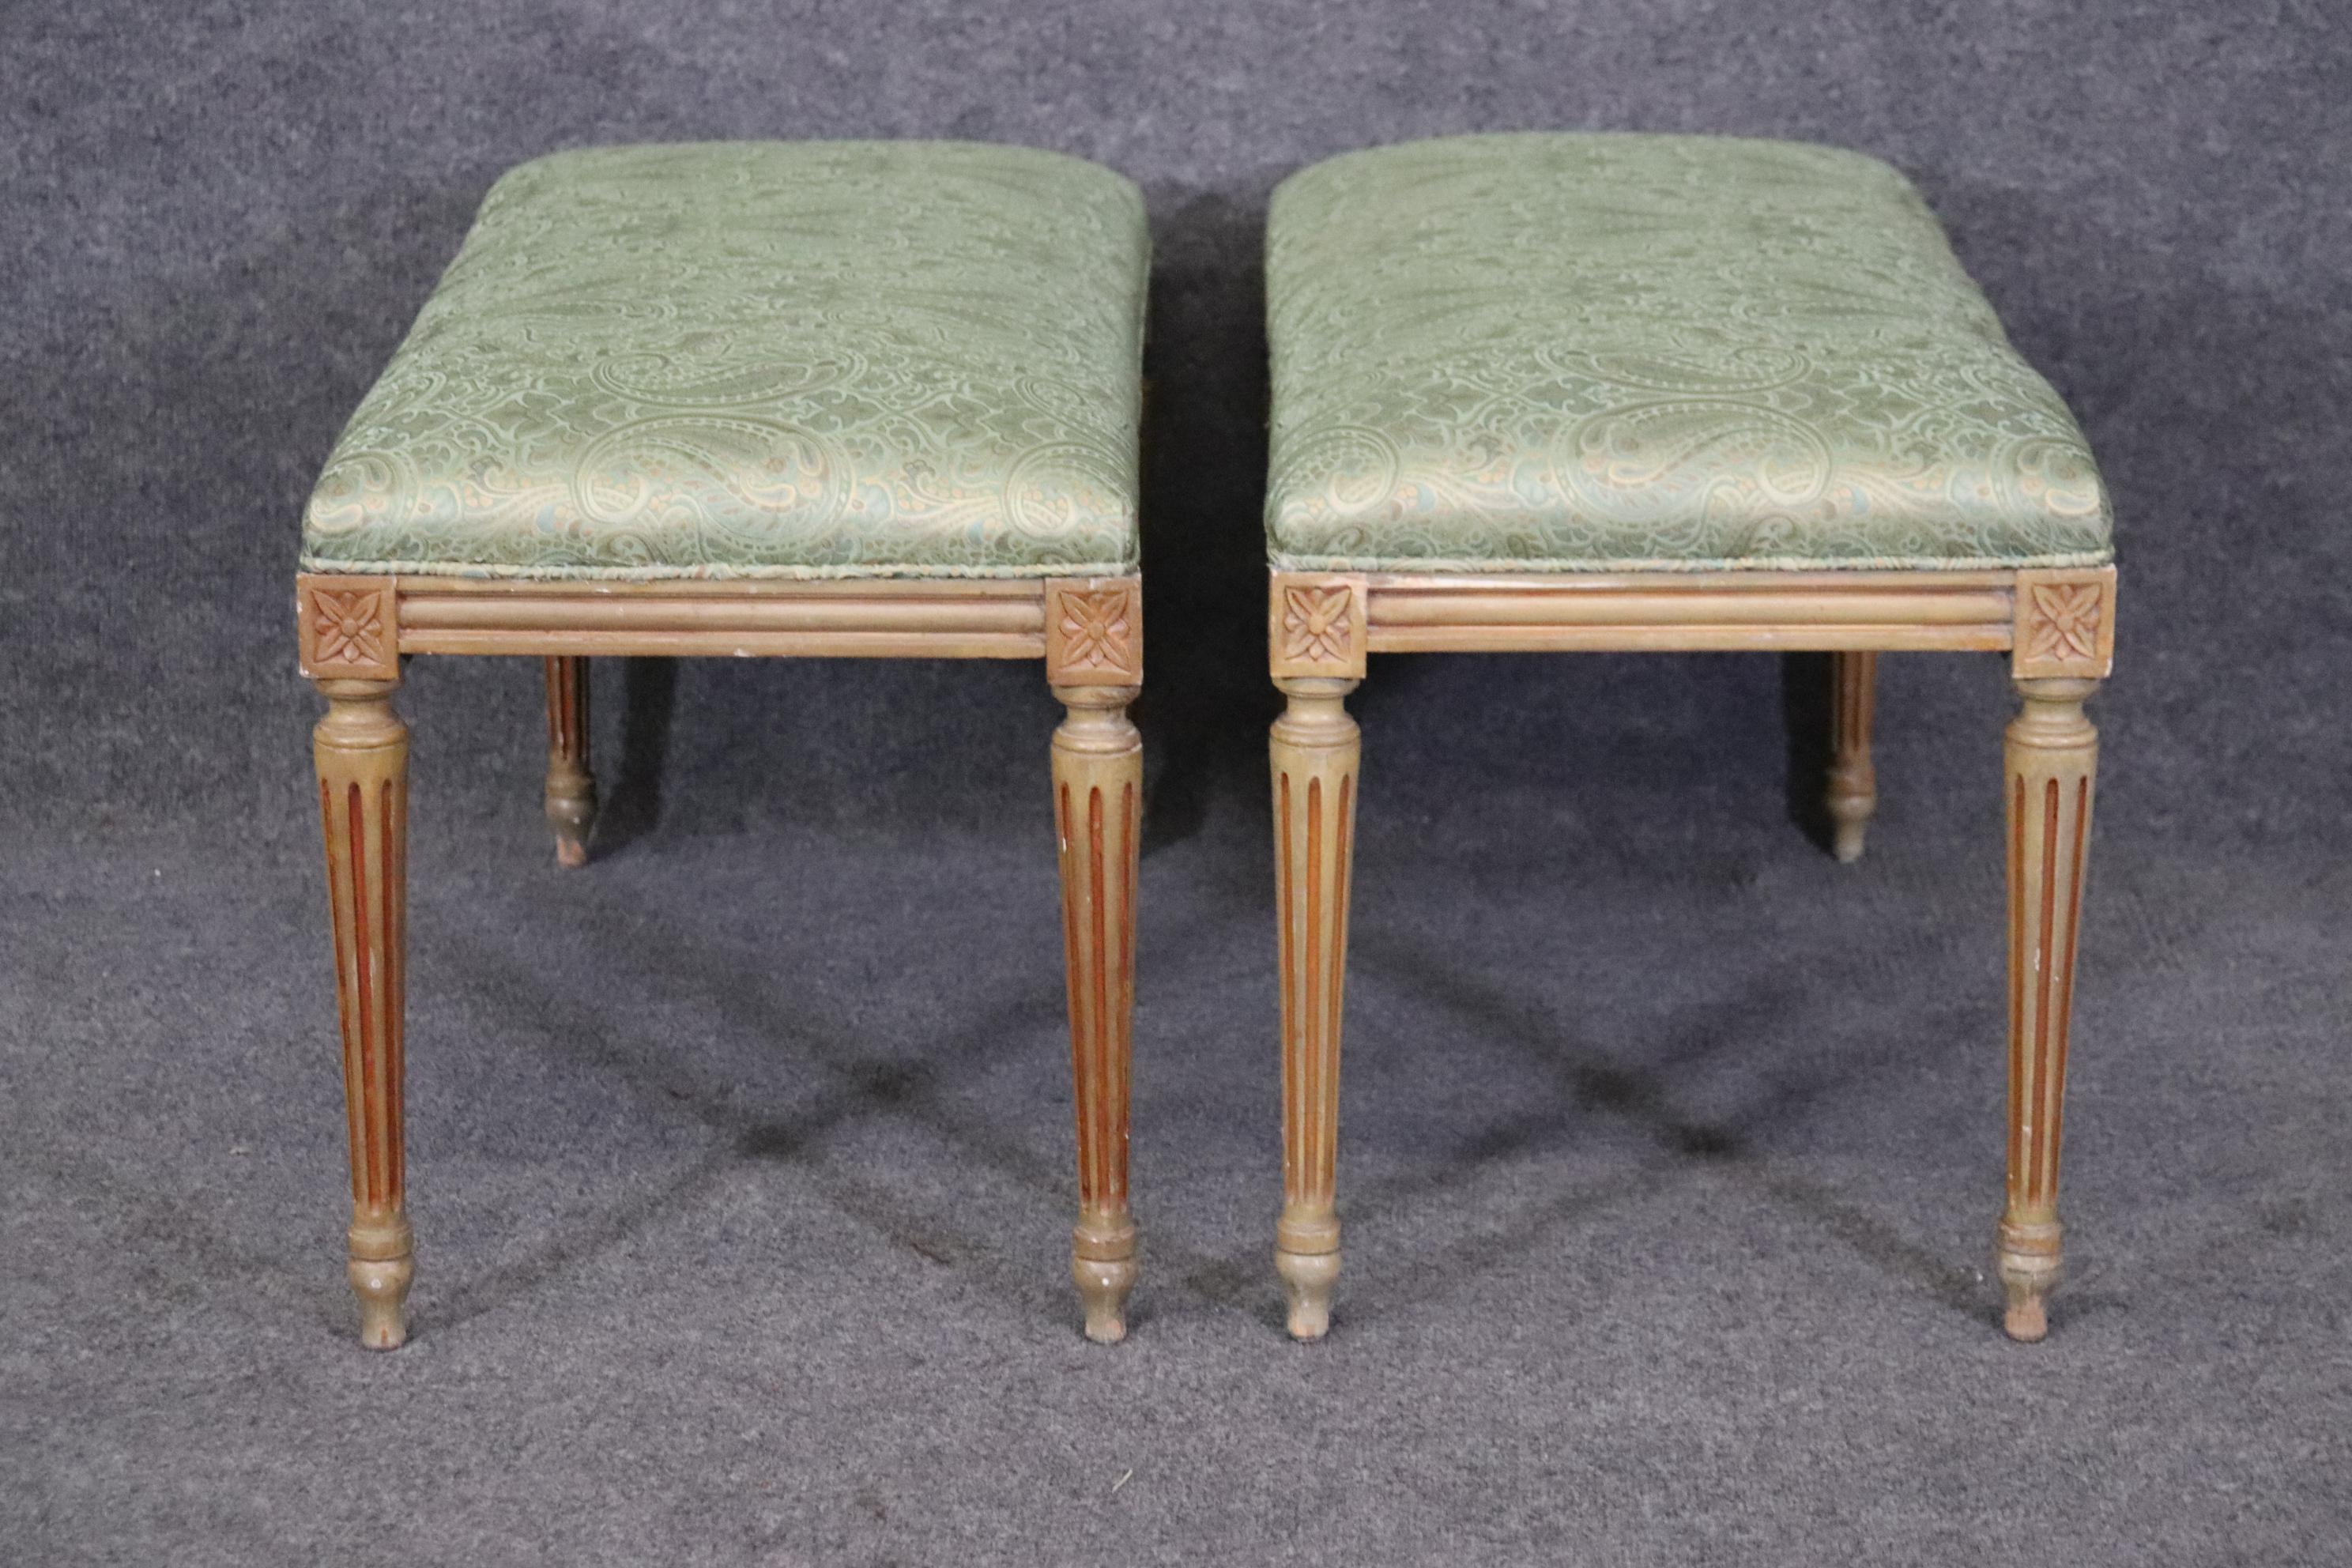 Pair of Louis XVI style Paint Decorated Upholstered Benches In Good Condition For Sale In Swedesboro, NJ